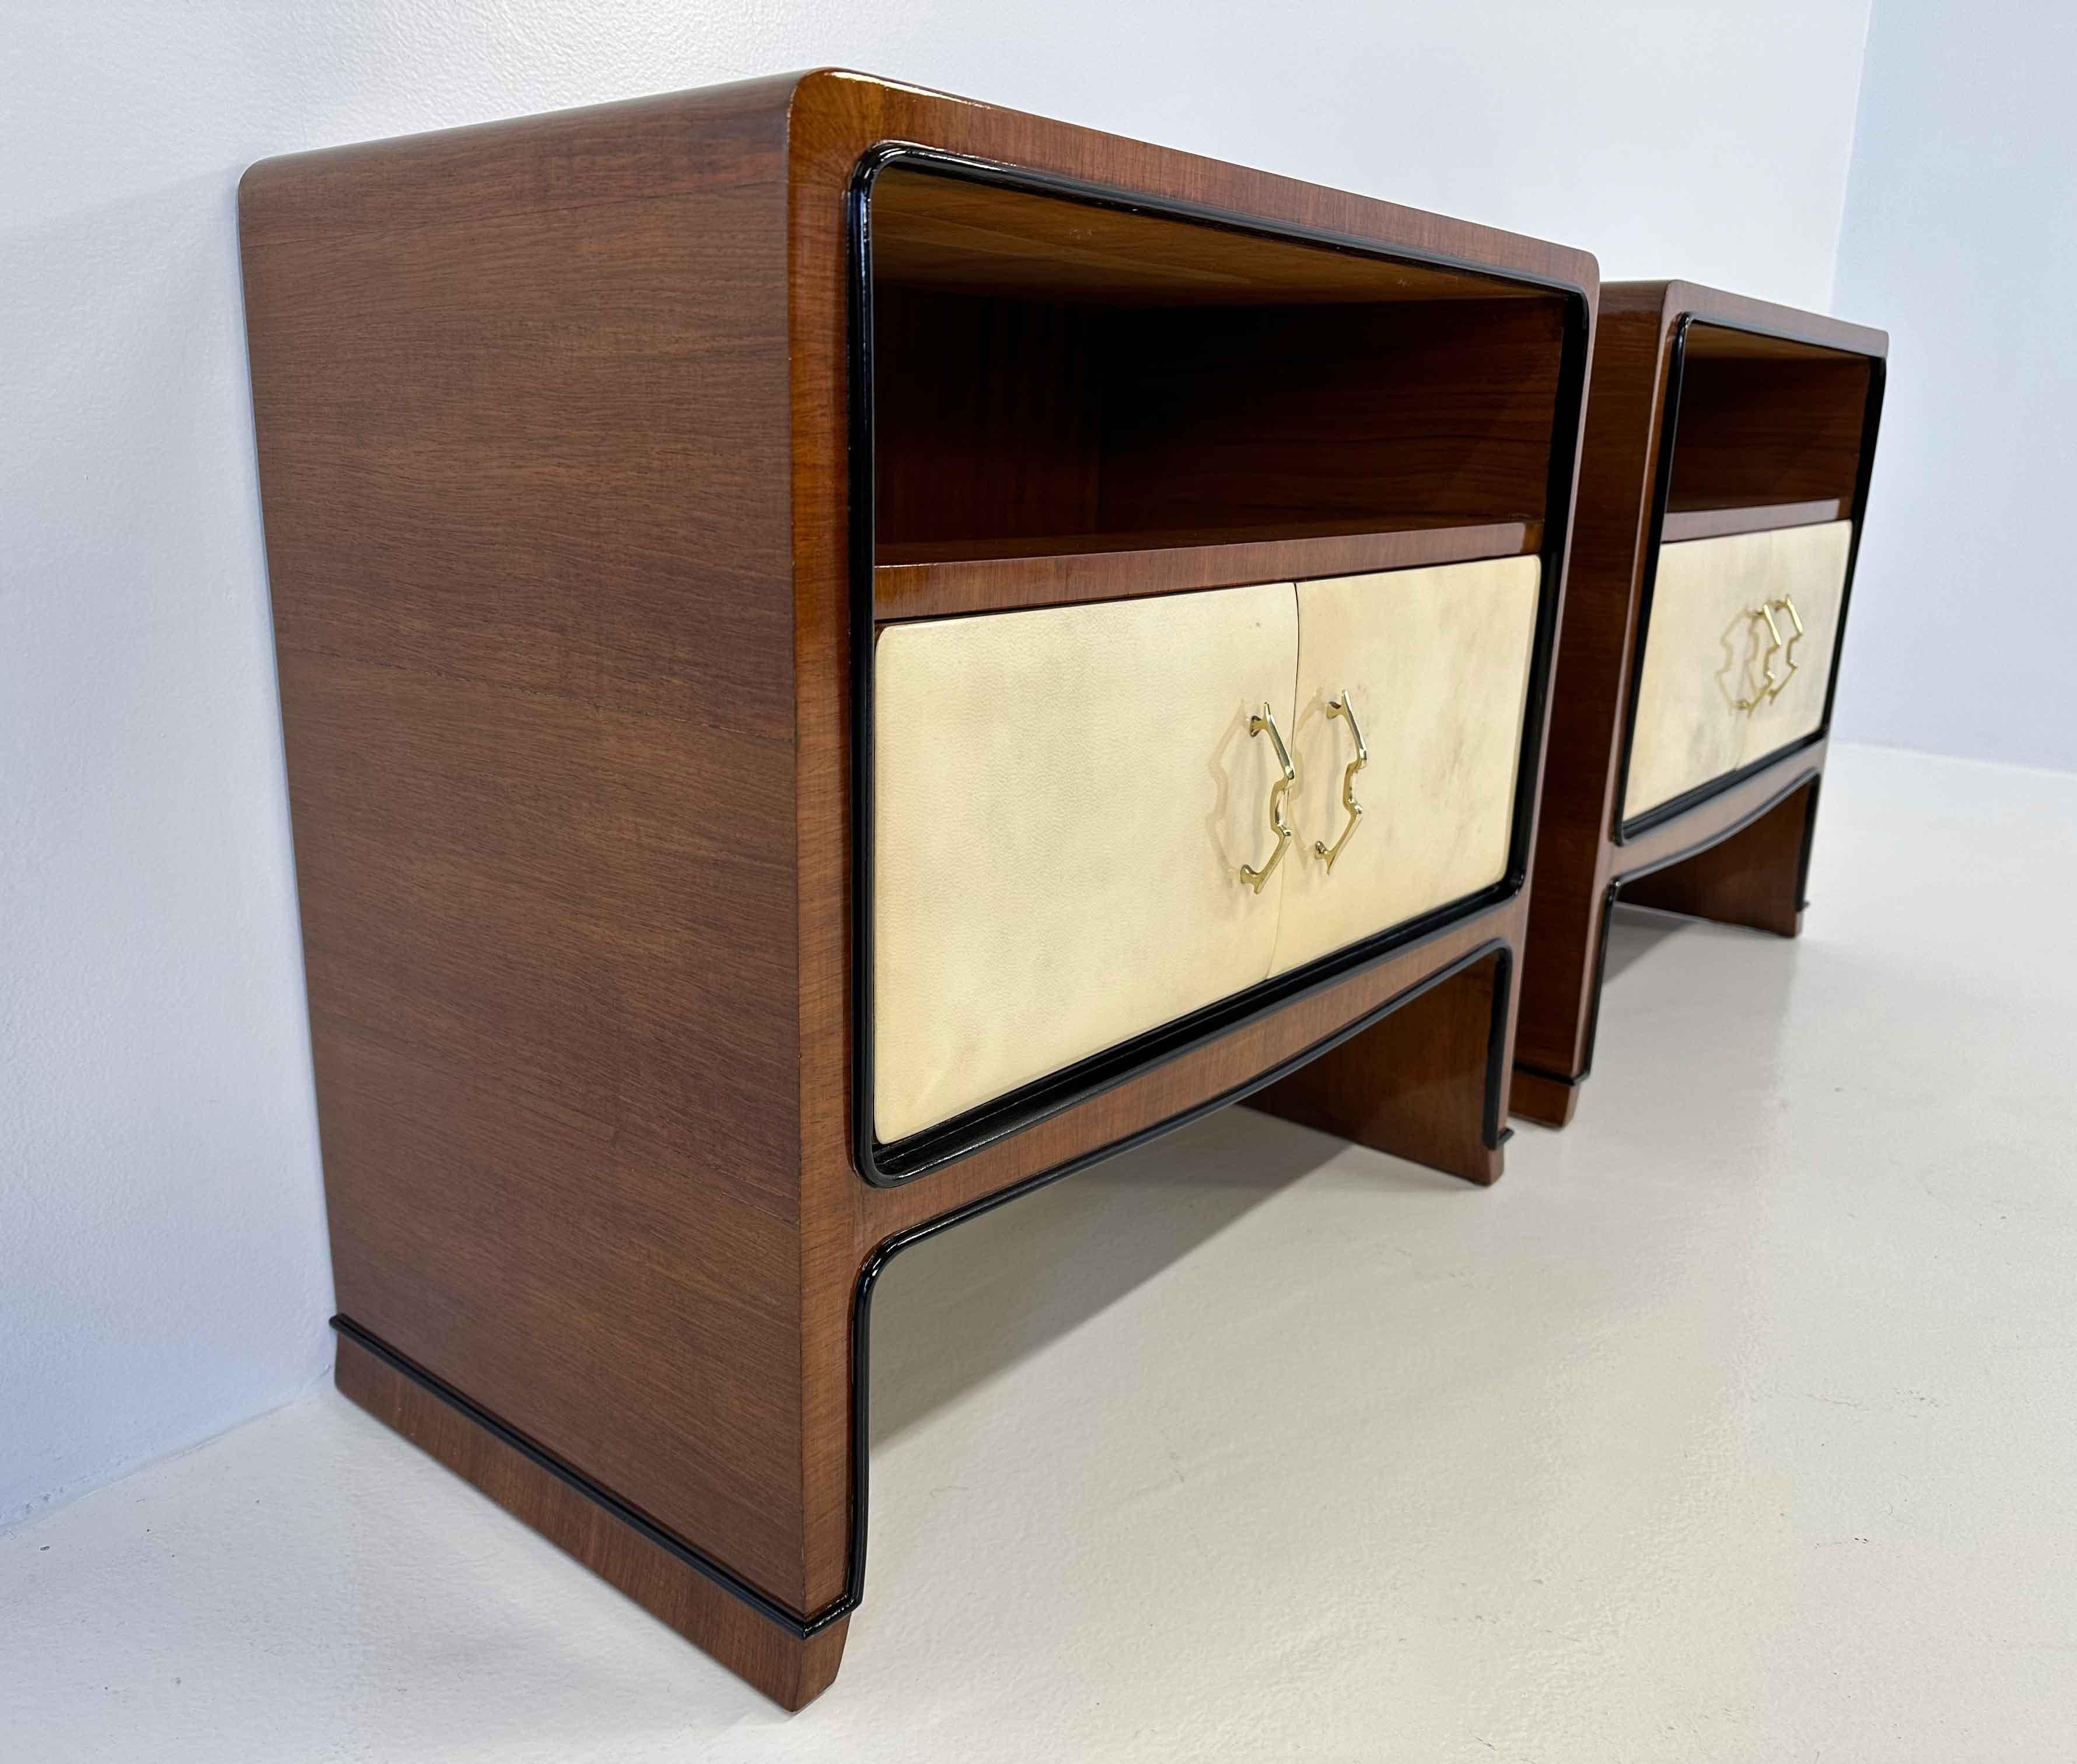 Italian Art Deco Parchment and Walnut Paolo Buffa Nightstands, 1940s For Sale 4